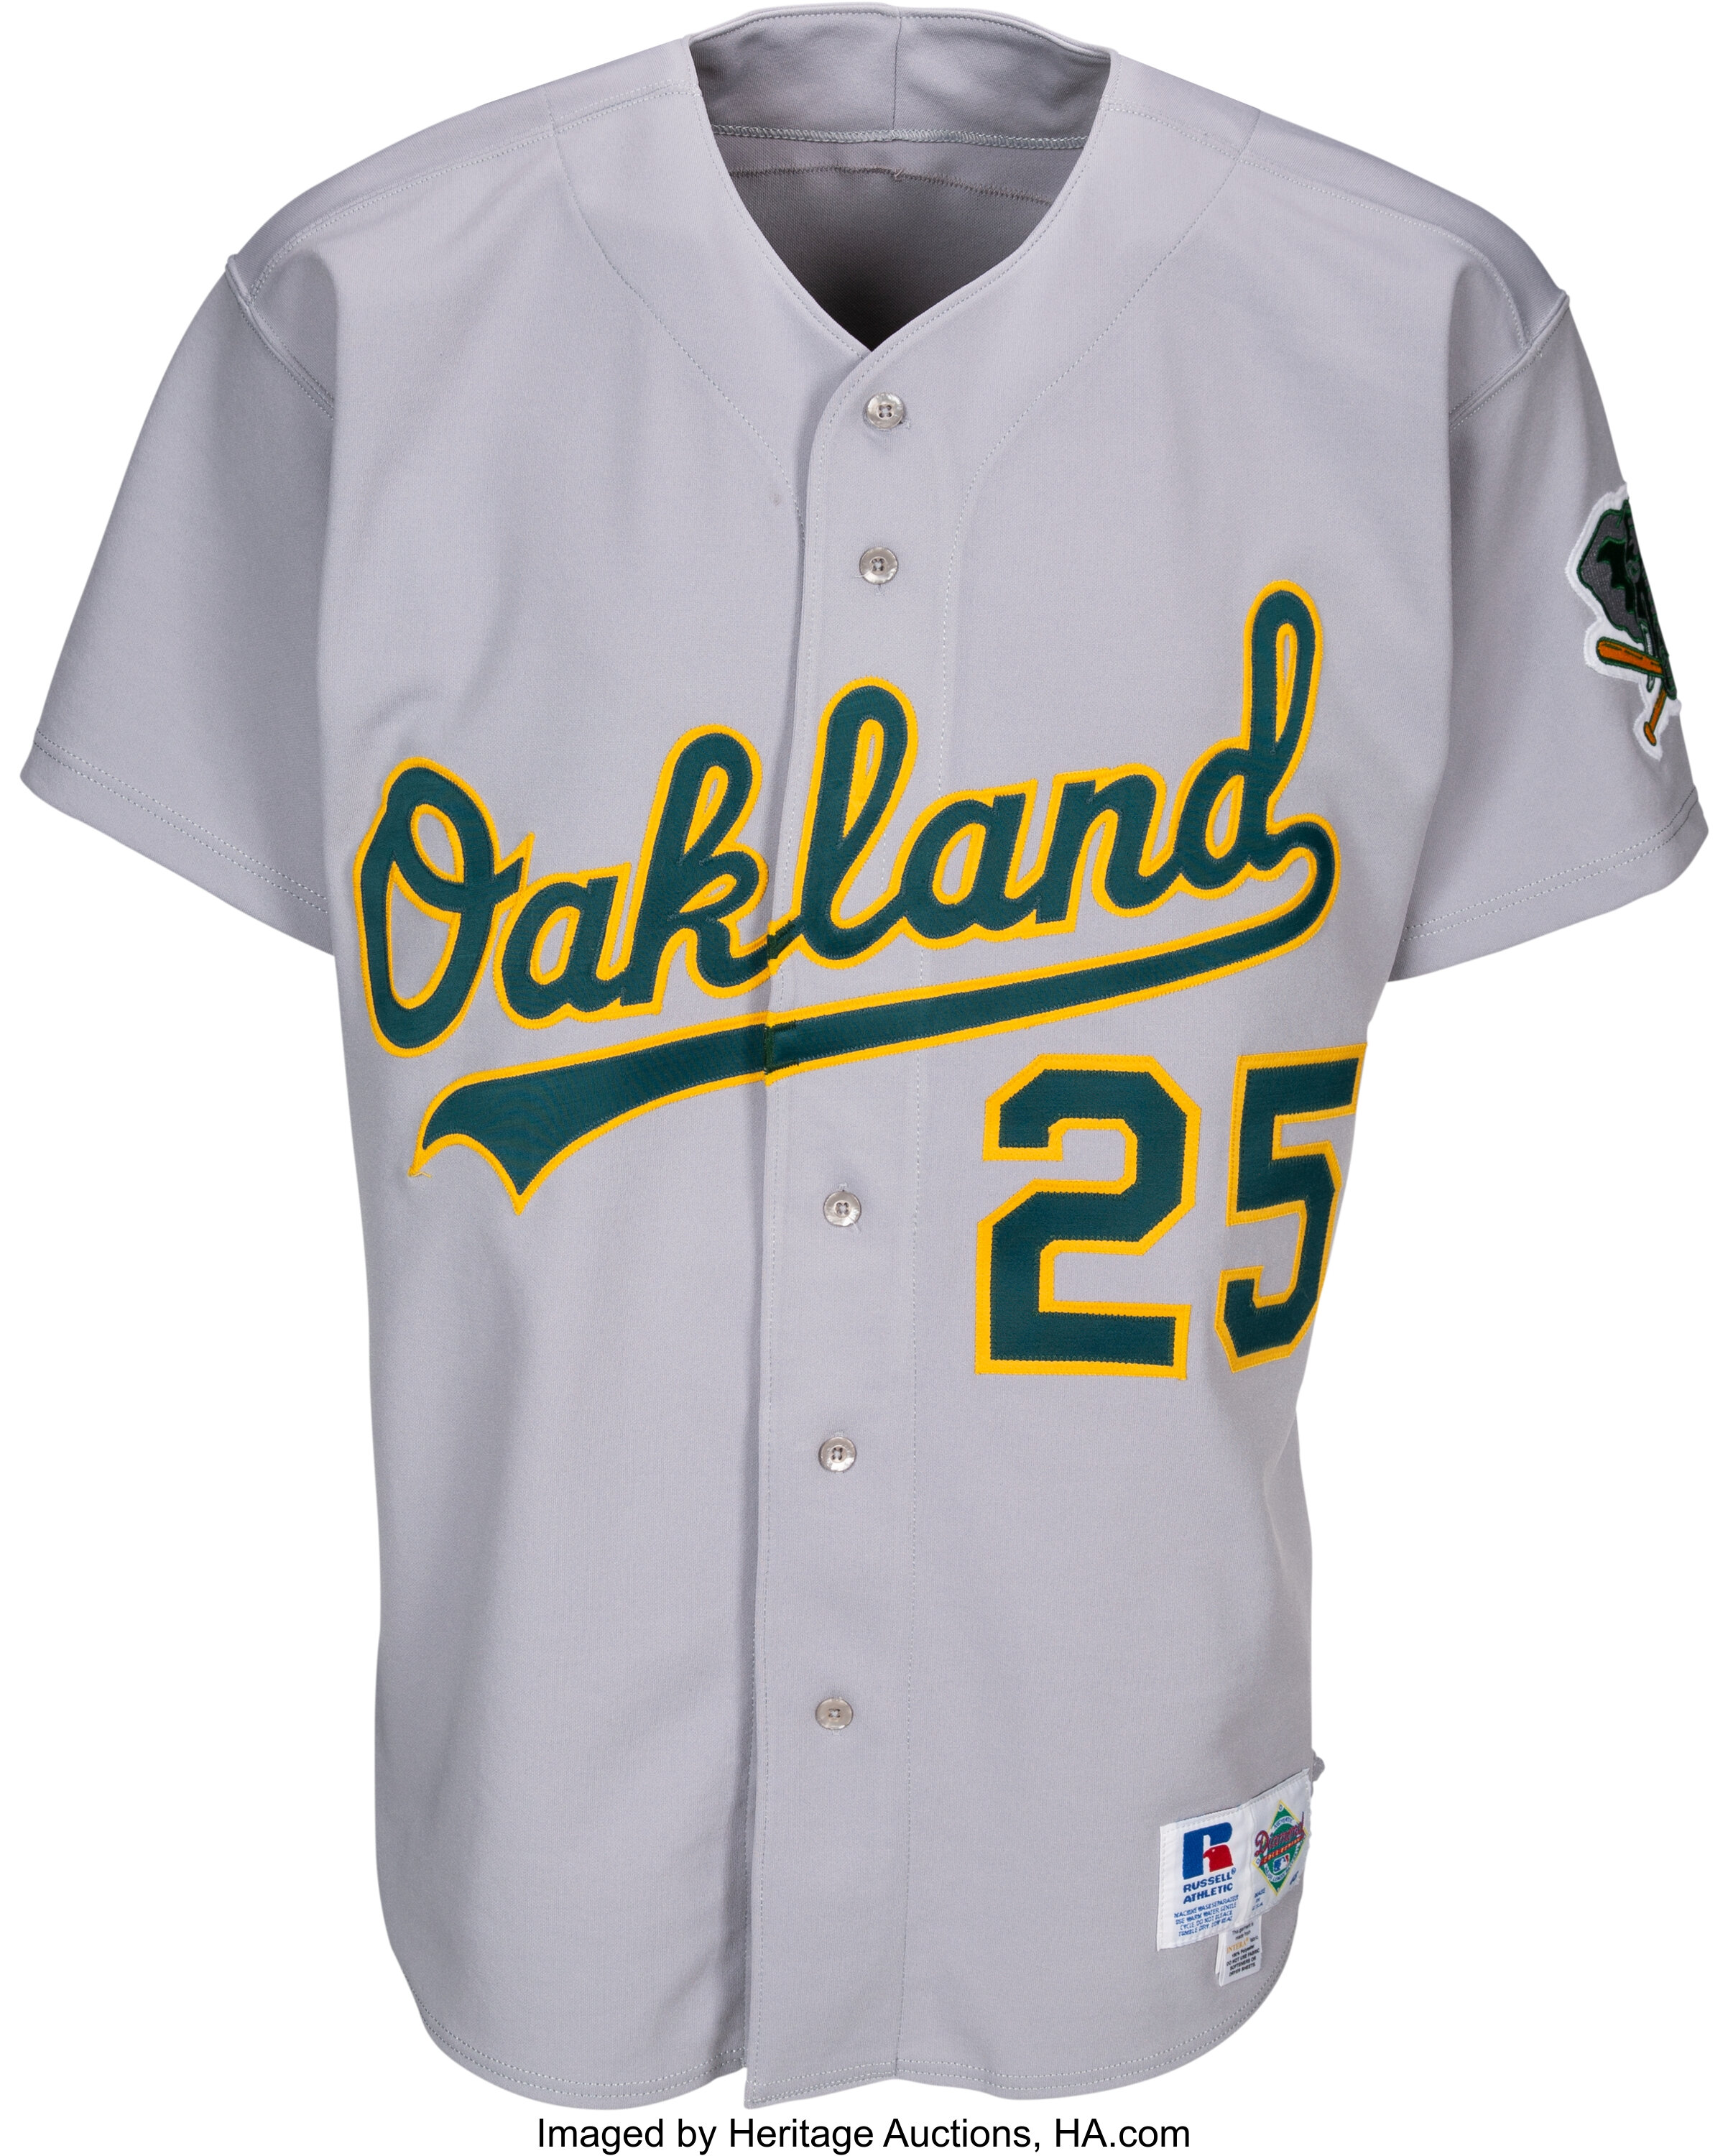 Oakland Athletics: The Color of Baseball Uniform/Jersey Poster